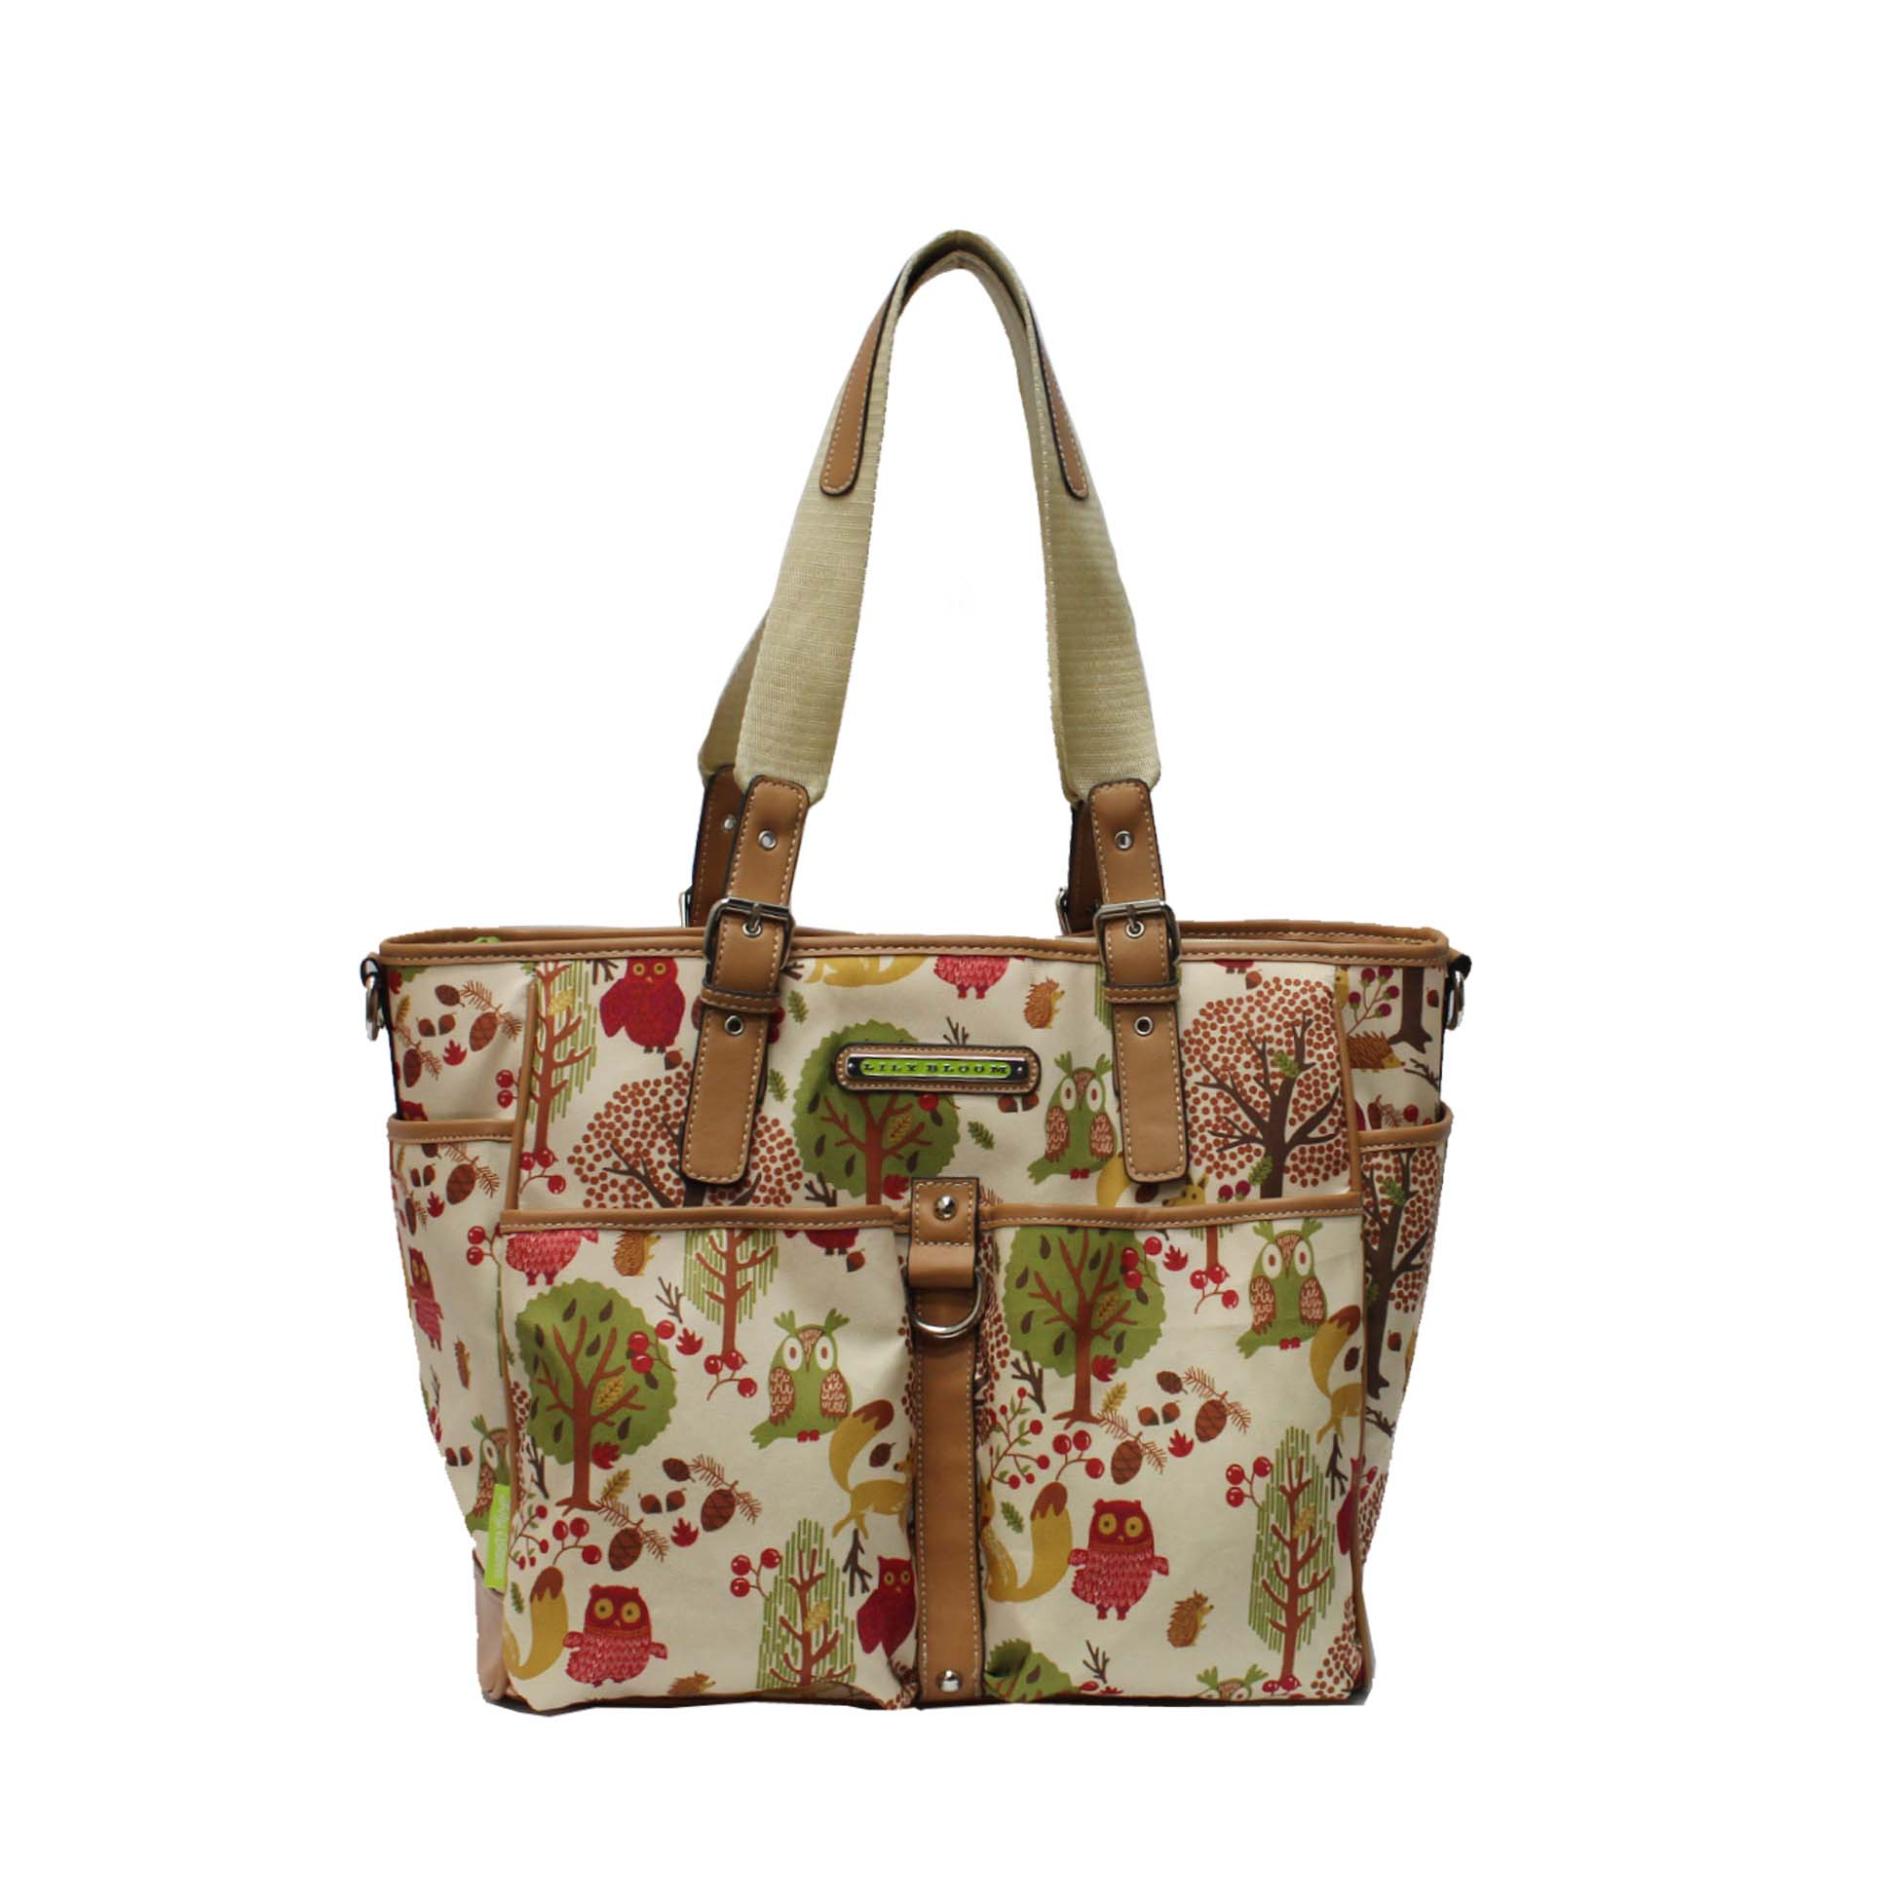 Lily Bloom Women's Laptop Tote Bag - Forest Print